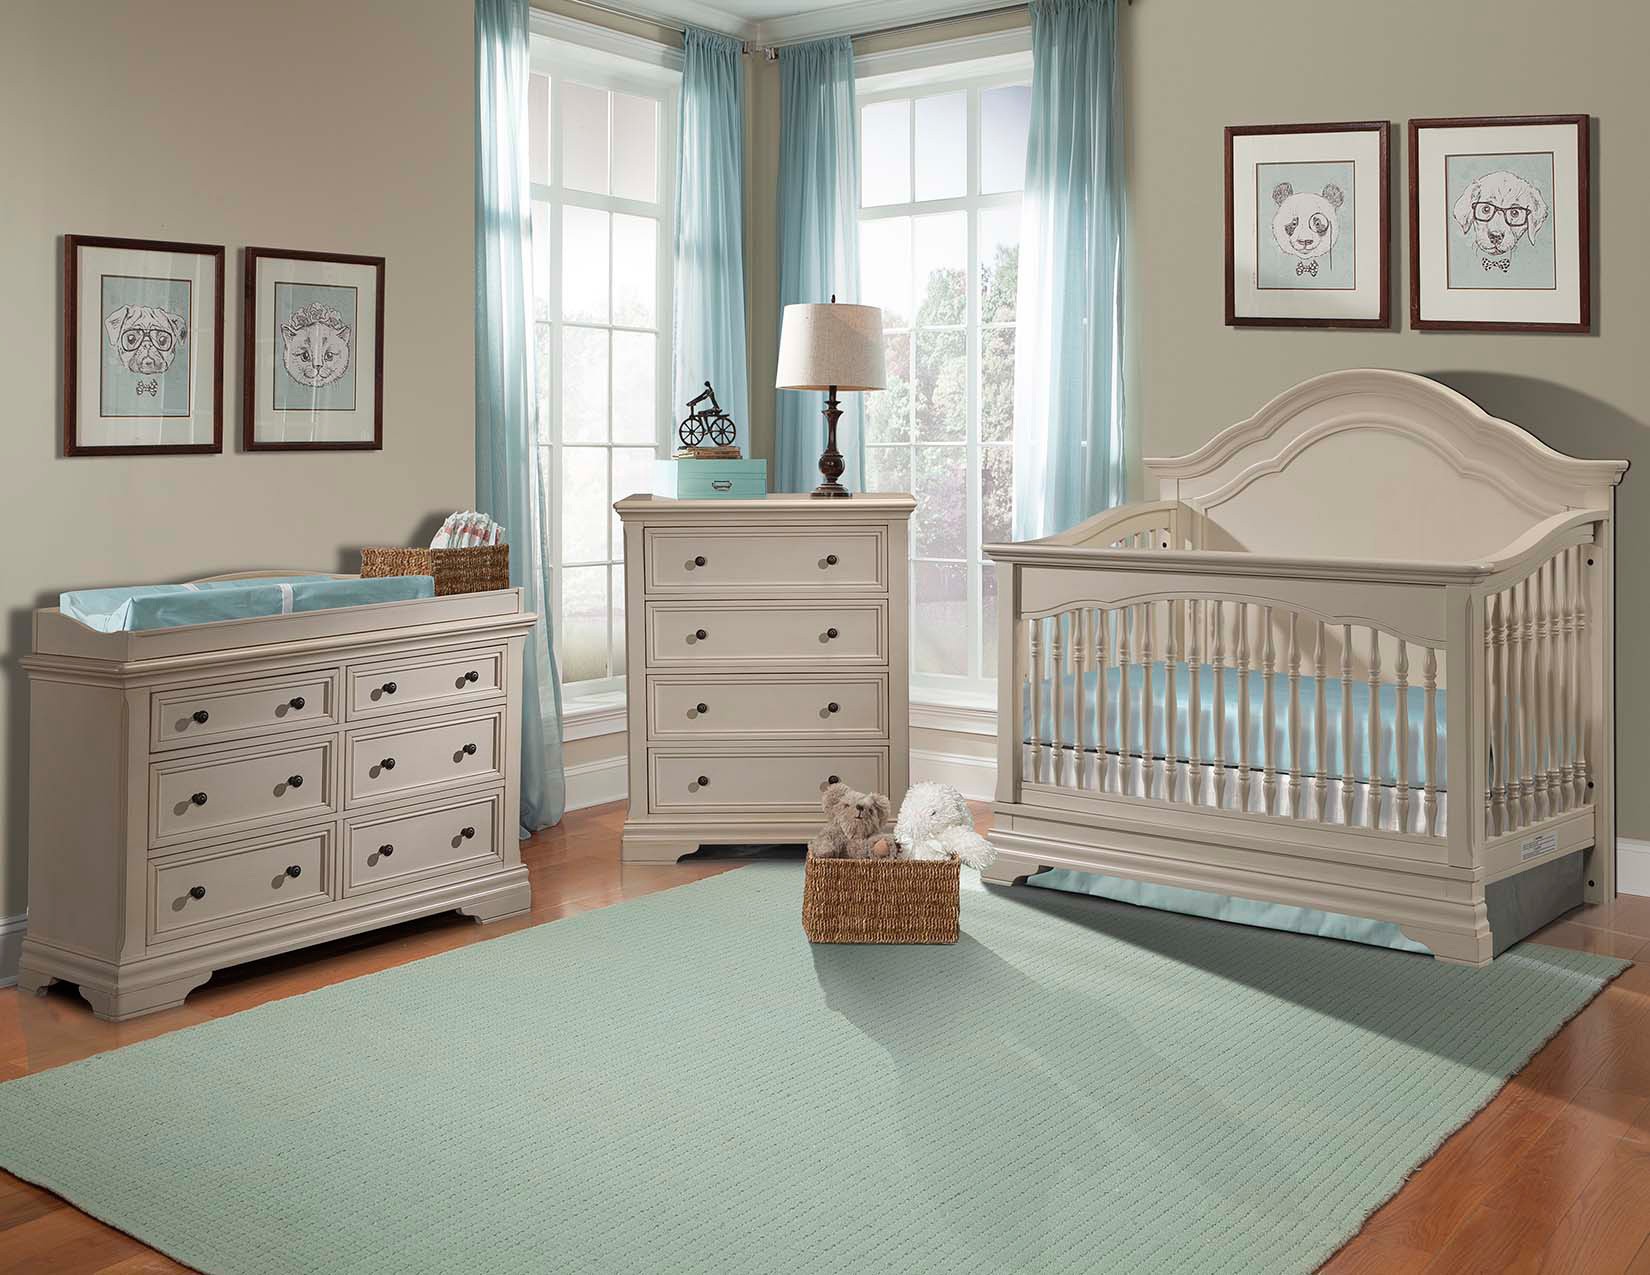 Nursery Sets: Essential For Your Child